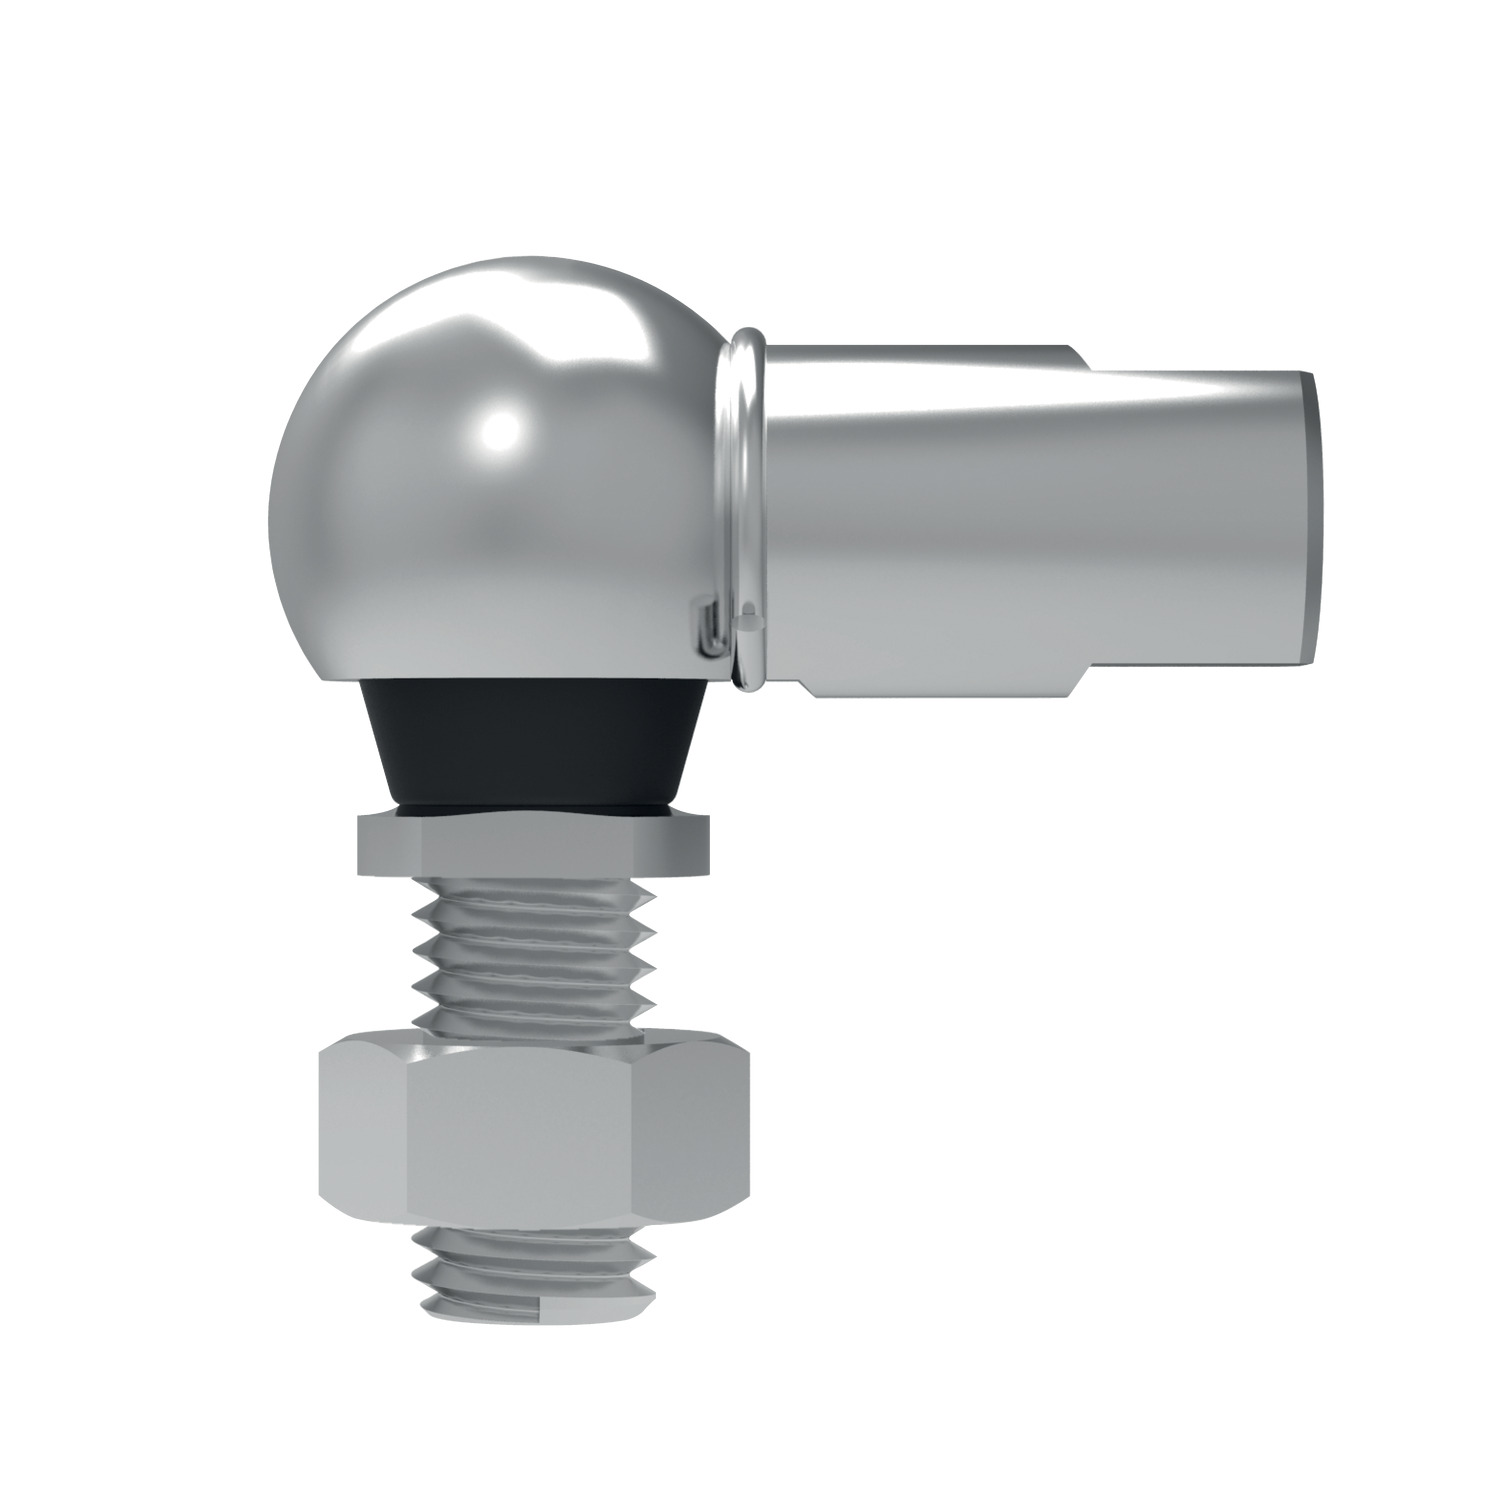 Product 65514, Stainless Ball and Socket Joint left hand thread  - with flats on housing / 